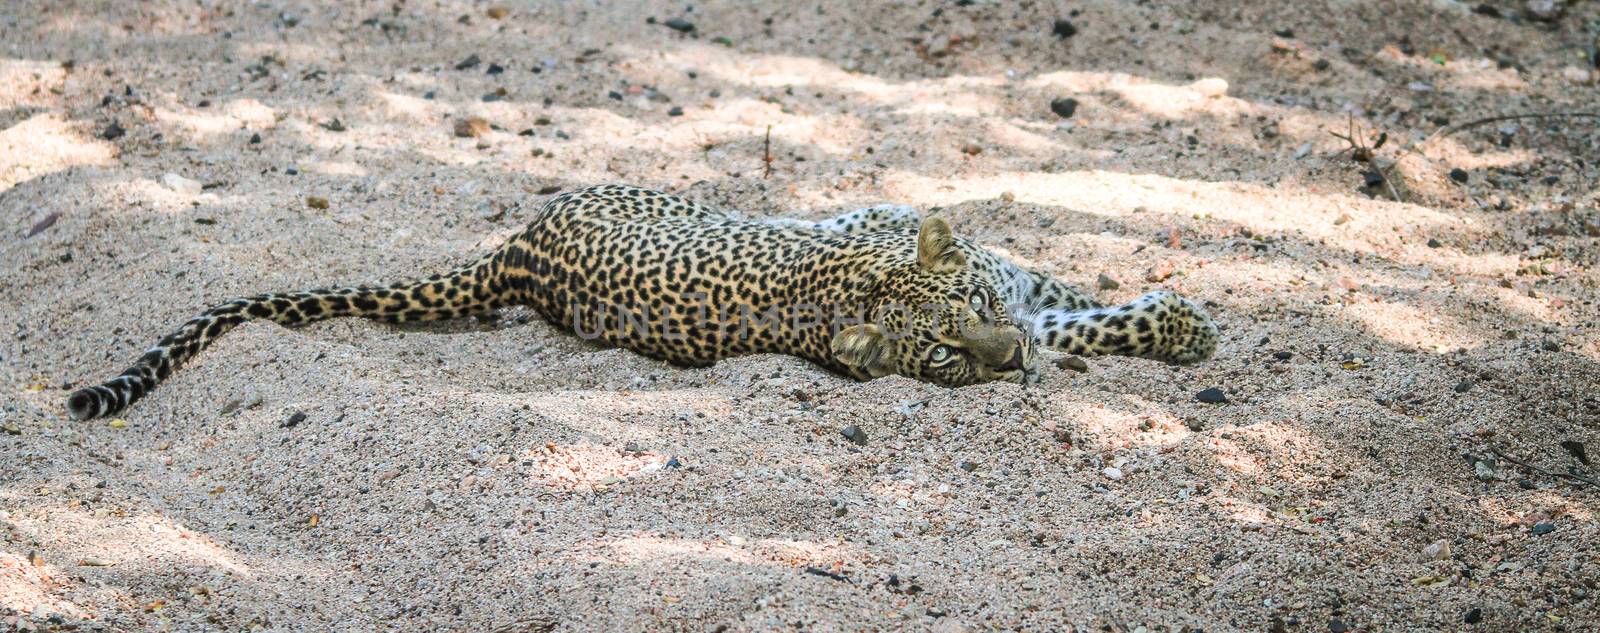 Leopard laying in the sand in the Sabi Sands by Simoneemanphotography